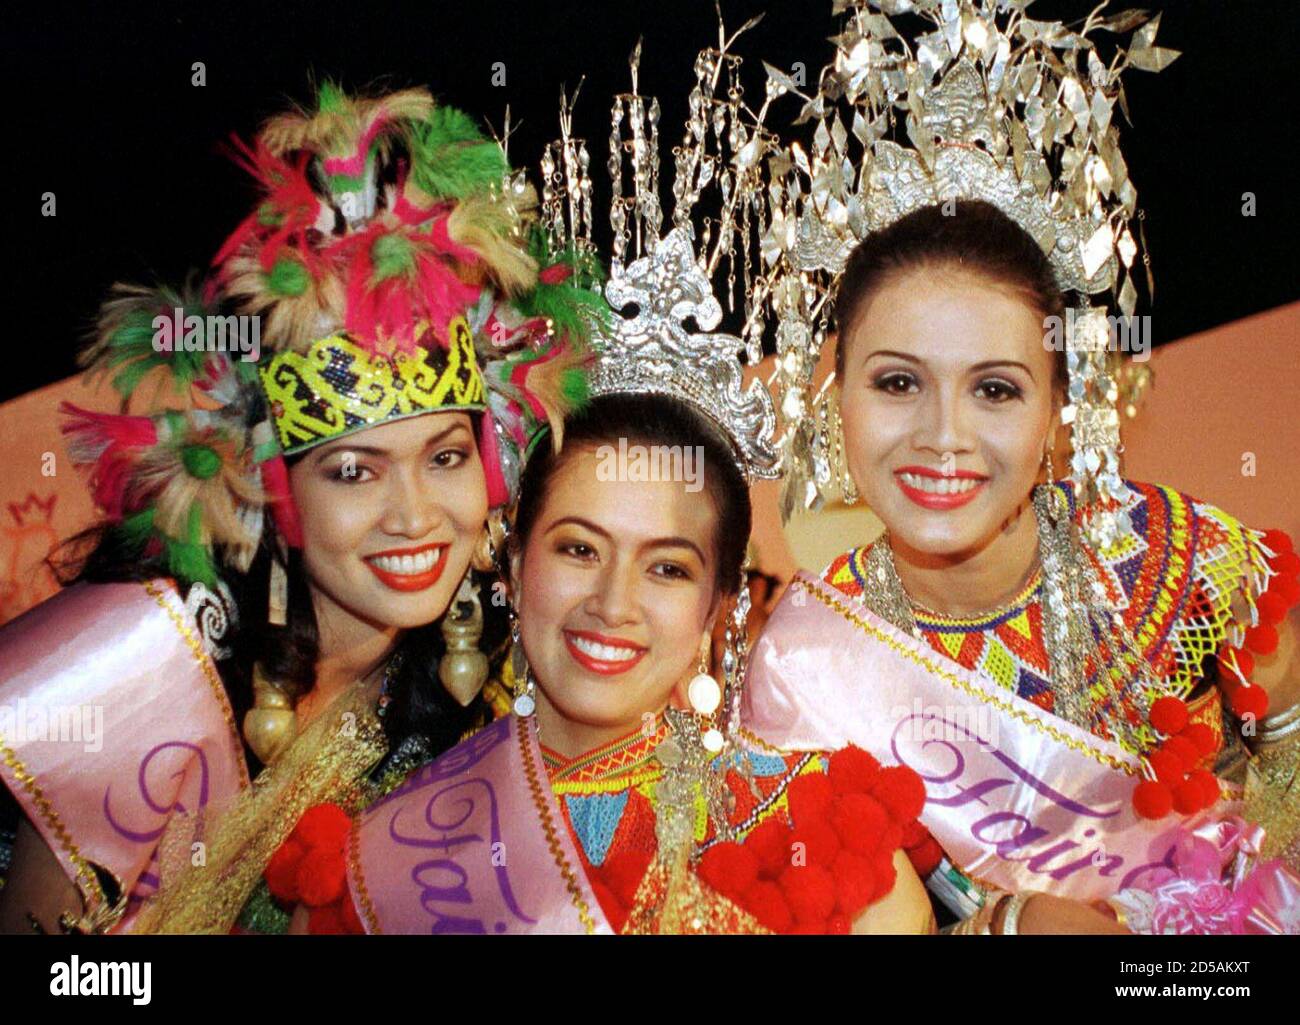 Eighteen-year-old Rowena Awa Ngumbang (C), winner of Miss Fair and Lovely Ethnic Beauty contest, poses with first runner-up Sophia James (R), 24, and second runner-up Duling Musit, 23, after the prize presentation at the Sarawak Cultural Village in Damai about 35 kilometers from Kuching, in the east Malaysian state of Sarawak May 22. Gawai Dayak festival, a thanksgiving for bountiful harvest is celebrated on June 1 every year by the Dayak community which formed almost half of Sarawak's 1.9 million population.  ZH/CC/ME Stock Photo